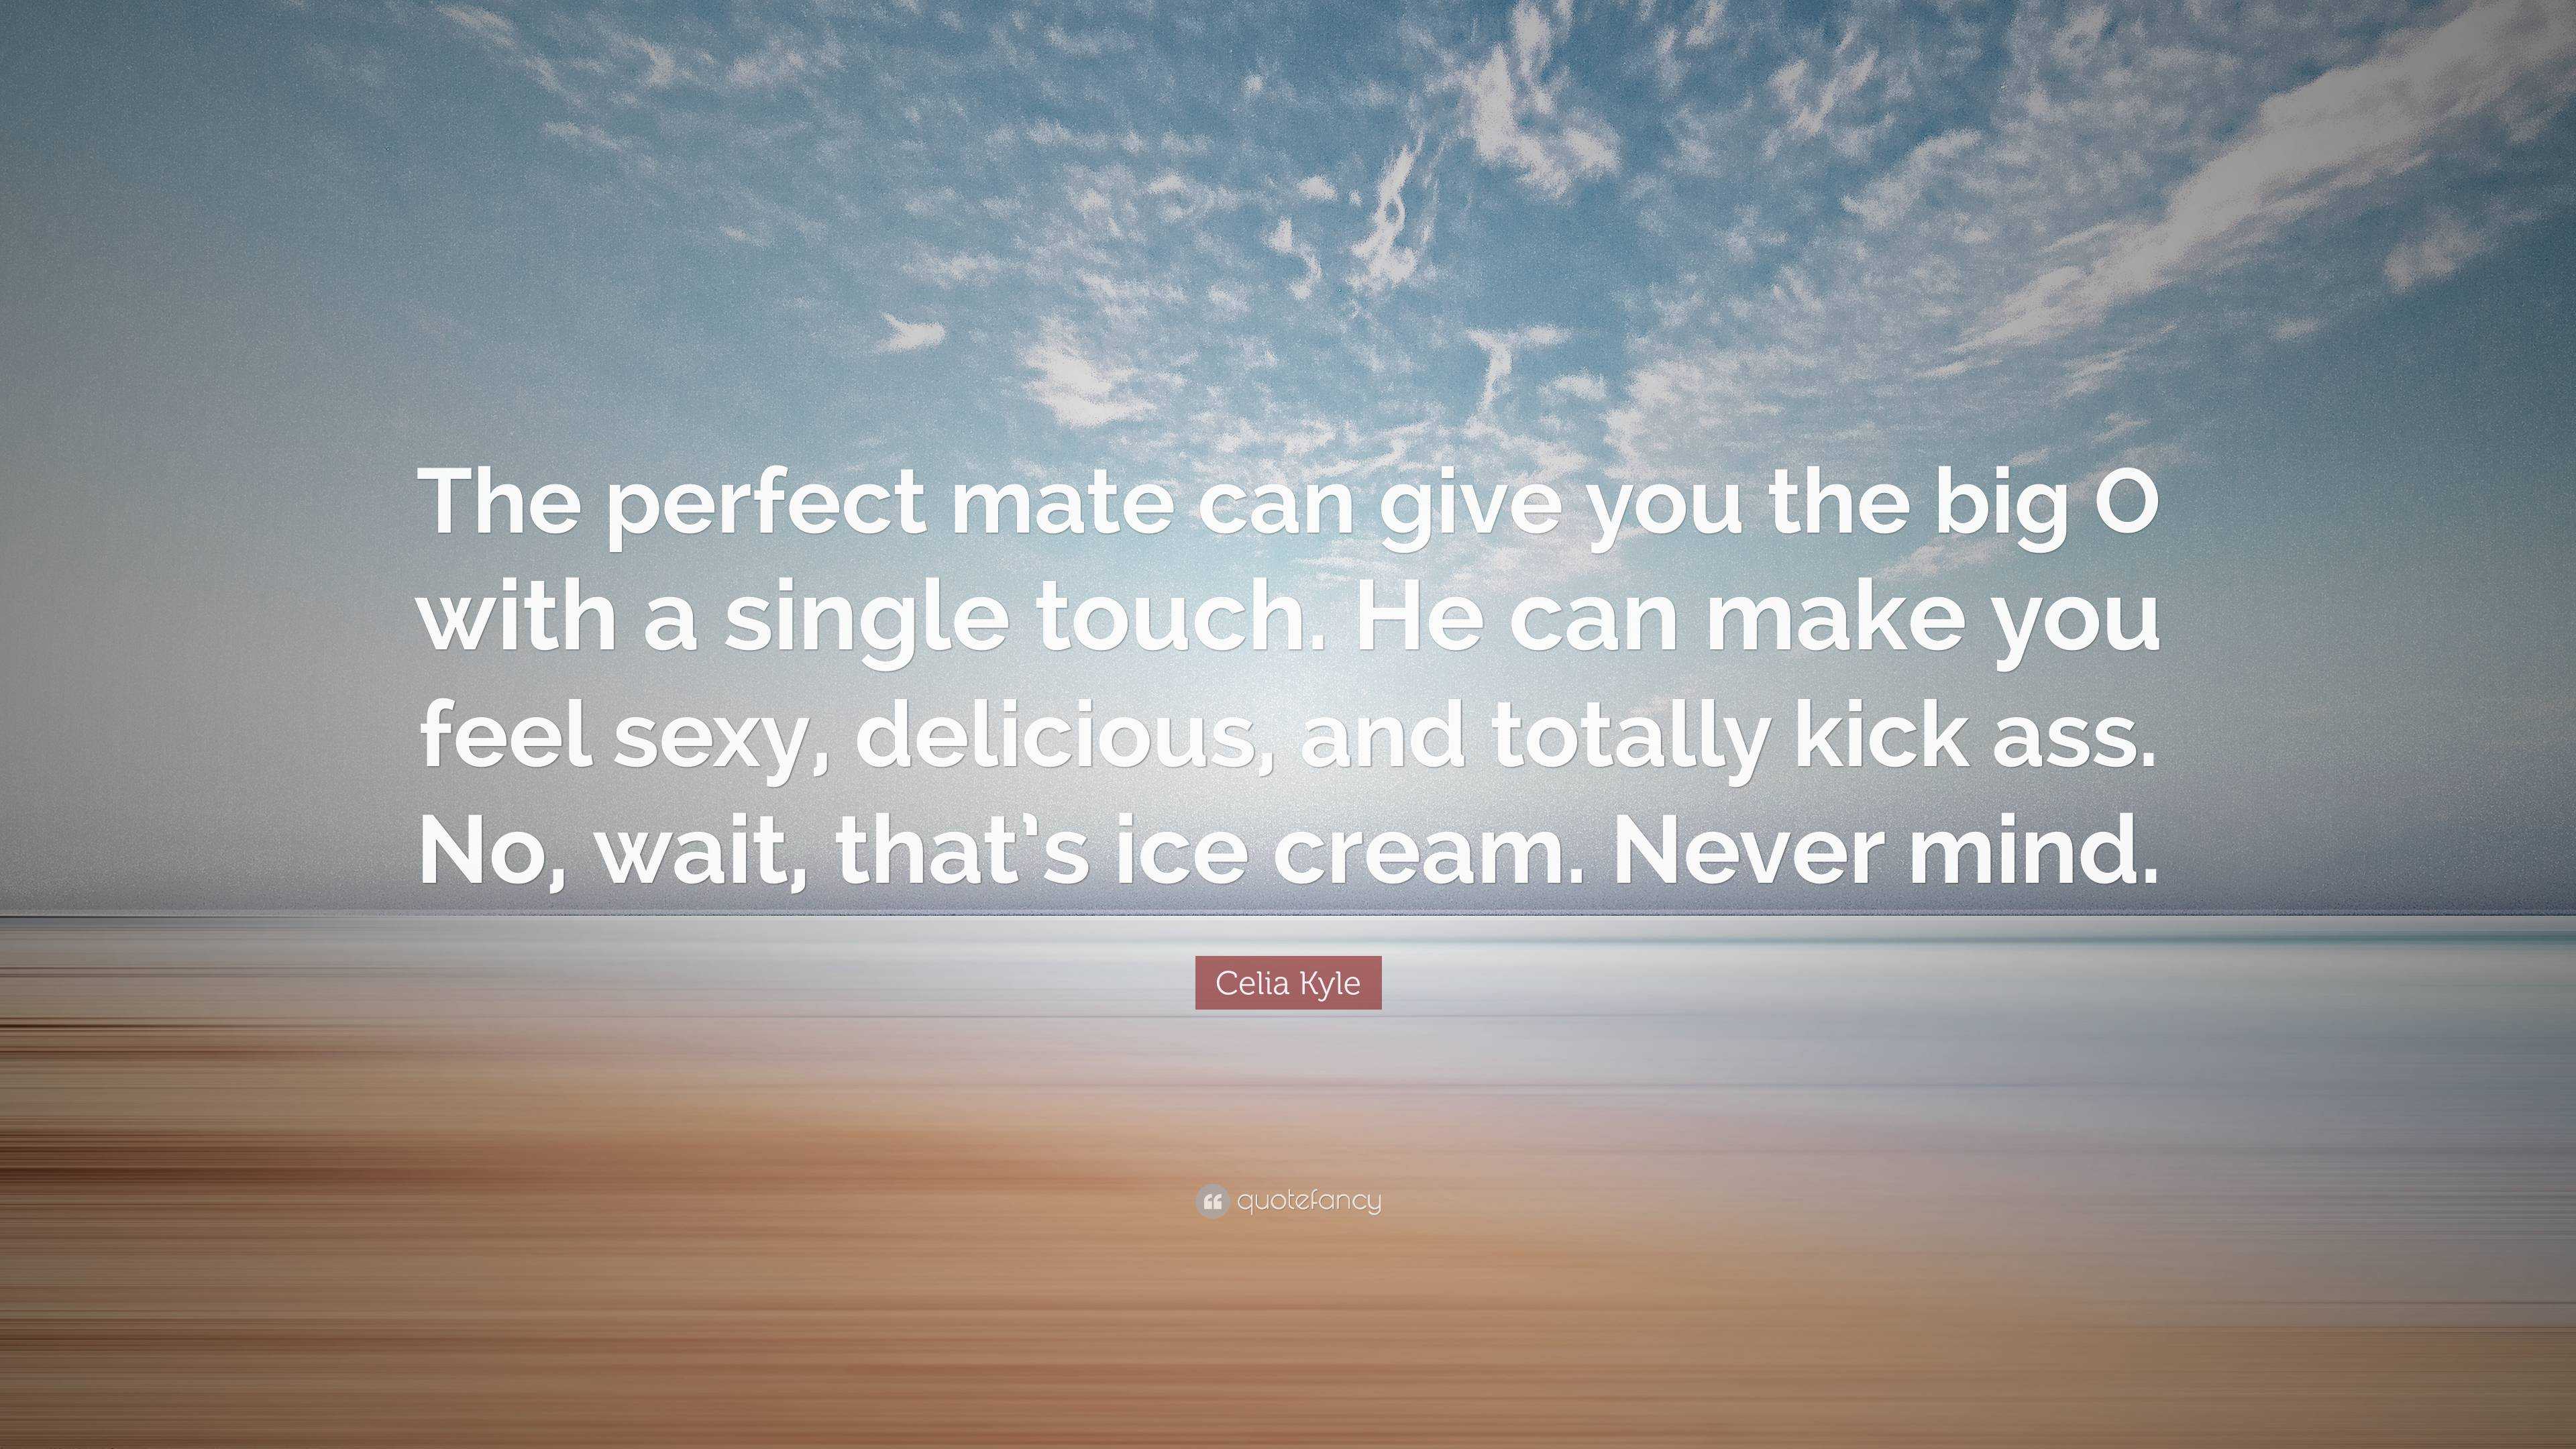 THE PERFECT MATE